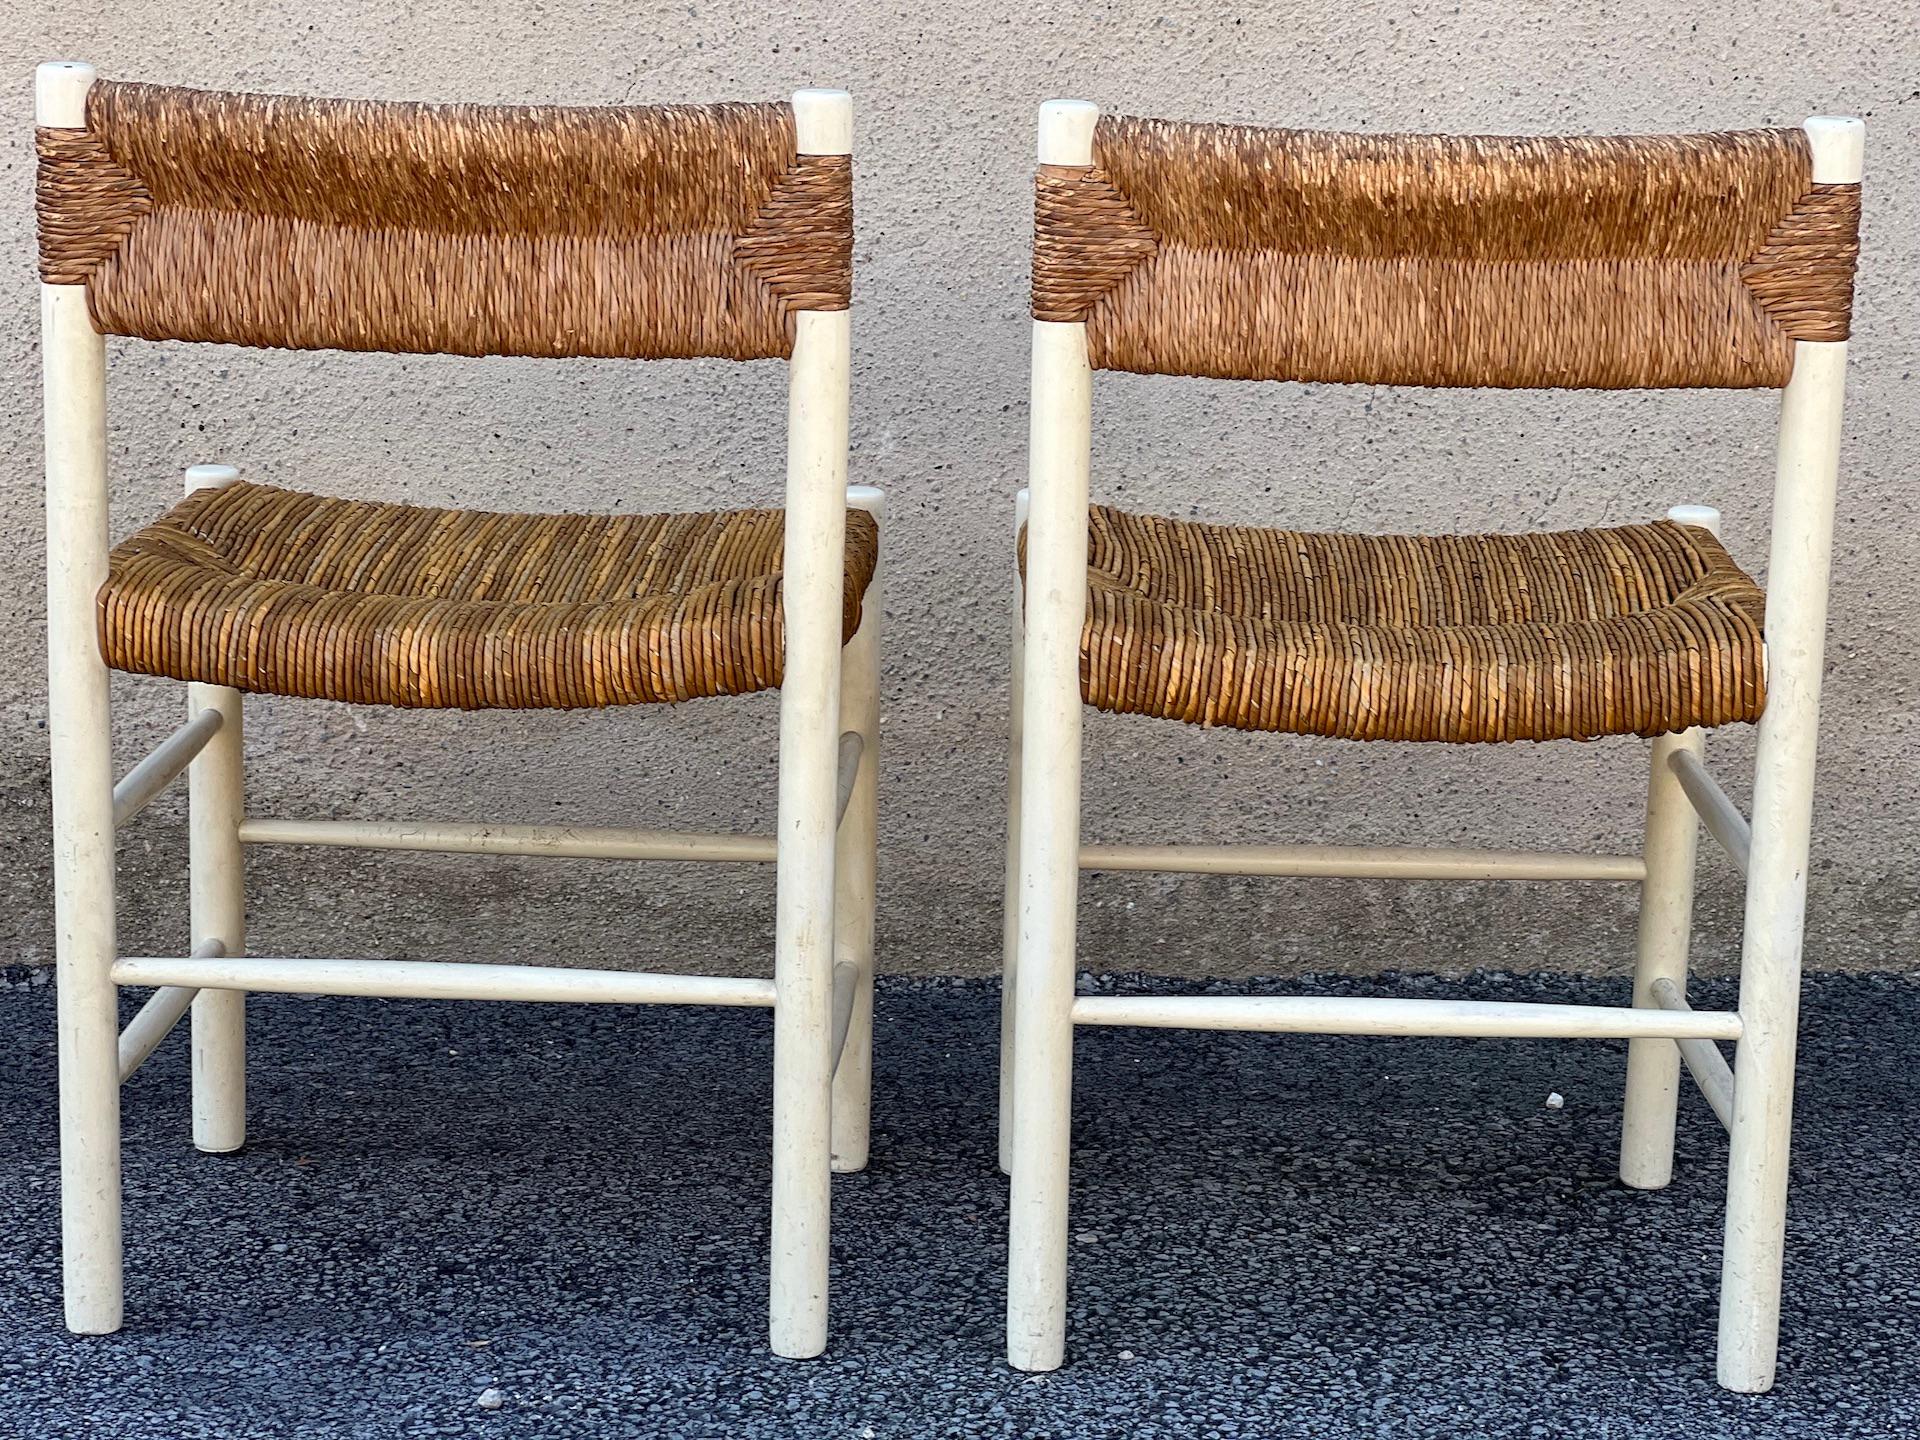 Pair of chairs Dordogne edition Robert Sentou, 1950
. Wooden structure painted white, seat and back in straw weaving. Seats redone. 
Dimensions: height: 76 cm
Width : 47 cm
Depth: 40 cm
Seat height: 48 cm